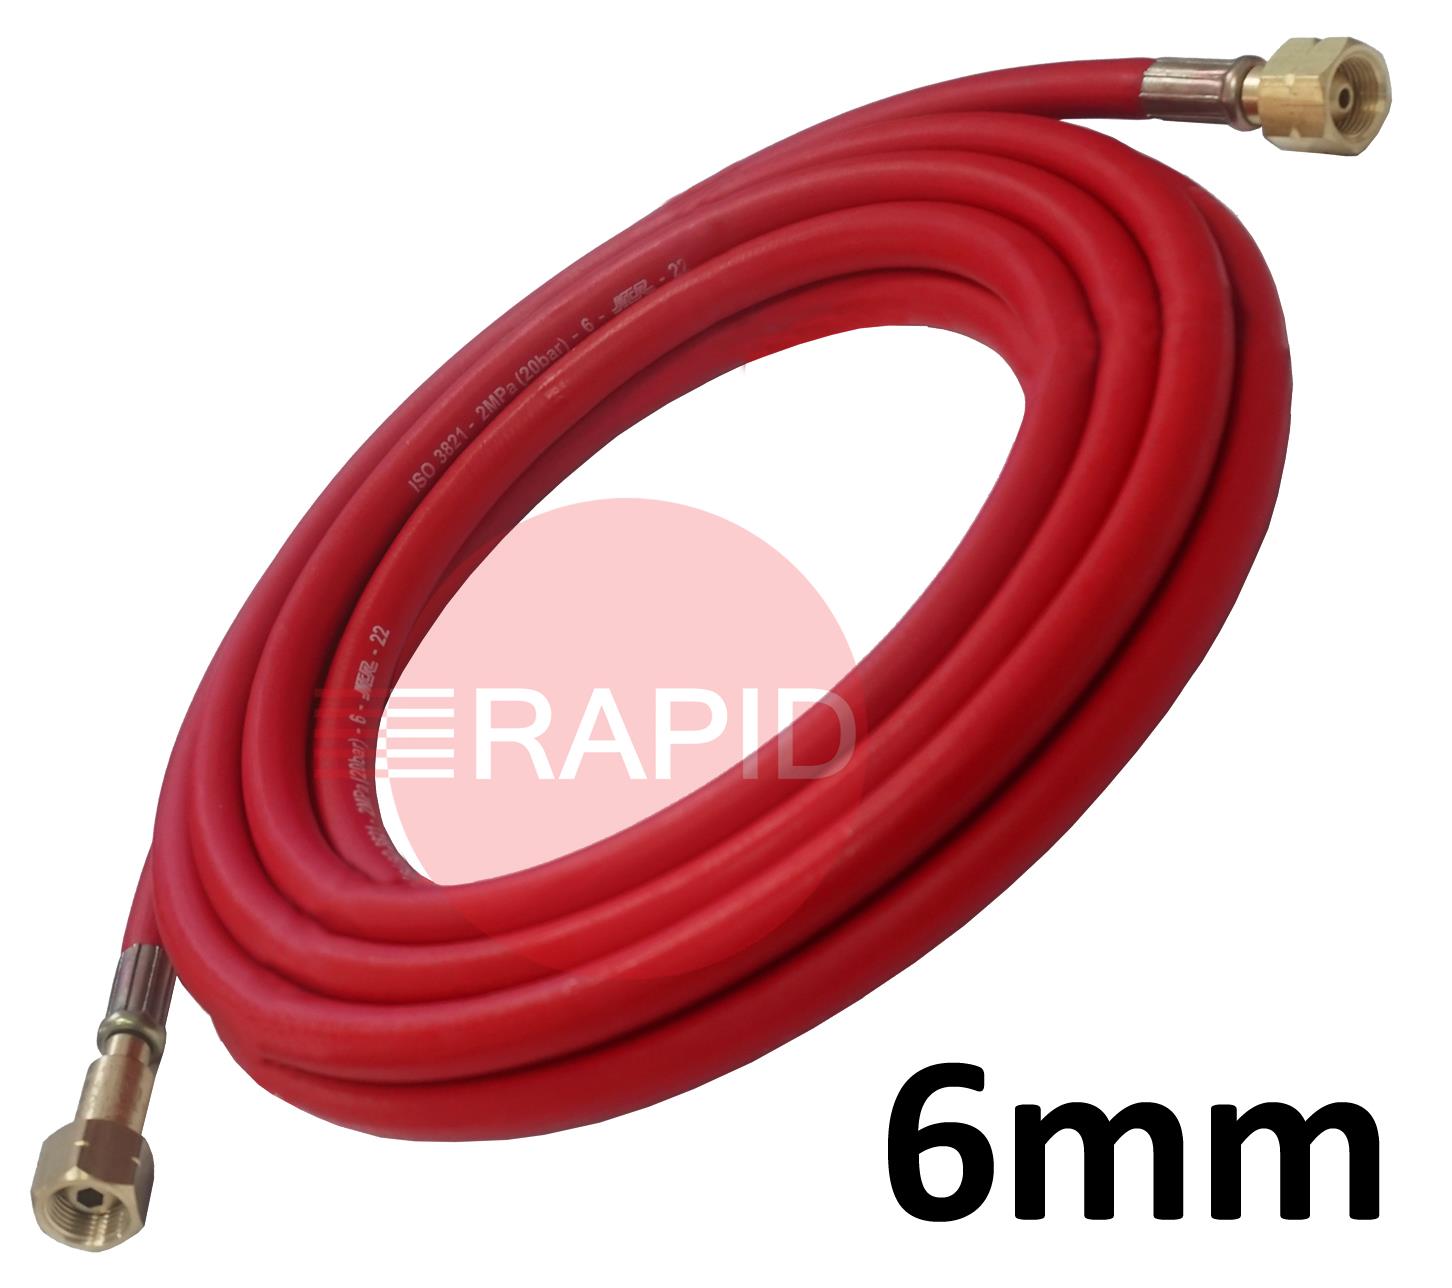 A5124  Fitted Acetylene Hose. 6mm Bore. G3/8 Check Valve & G3/8 Regulator Connection - 10m